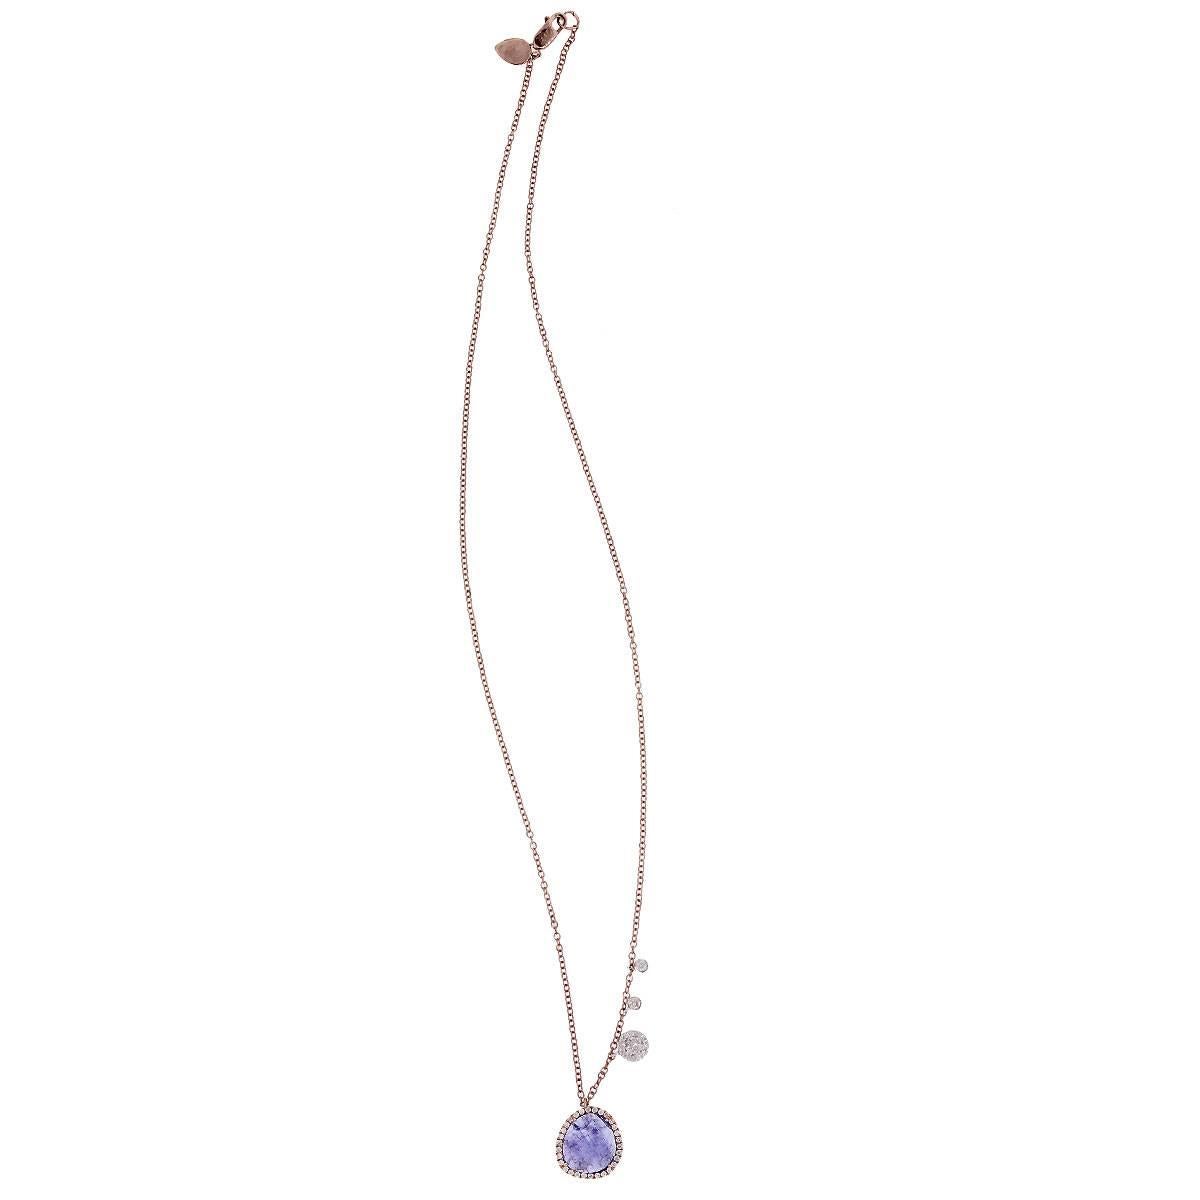 Designer	Meira T
Style	Meira T Diamond & Tanzanite Pendant Necklace
Material	14k Rose Gold
Diamond Details	Approximately 0.27ctw of round brilliant diamonds. Diamonds are G/H in color and SI in clarity
Gemstone Details	Approximately 1.85ct